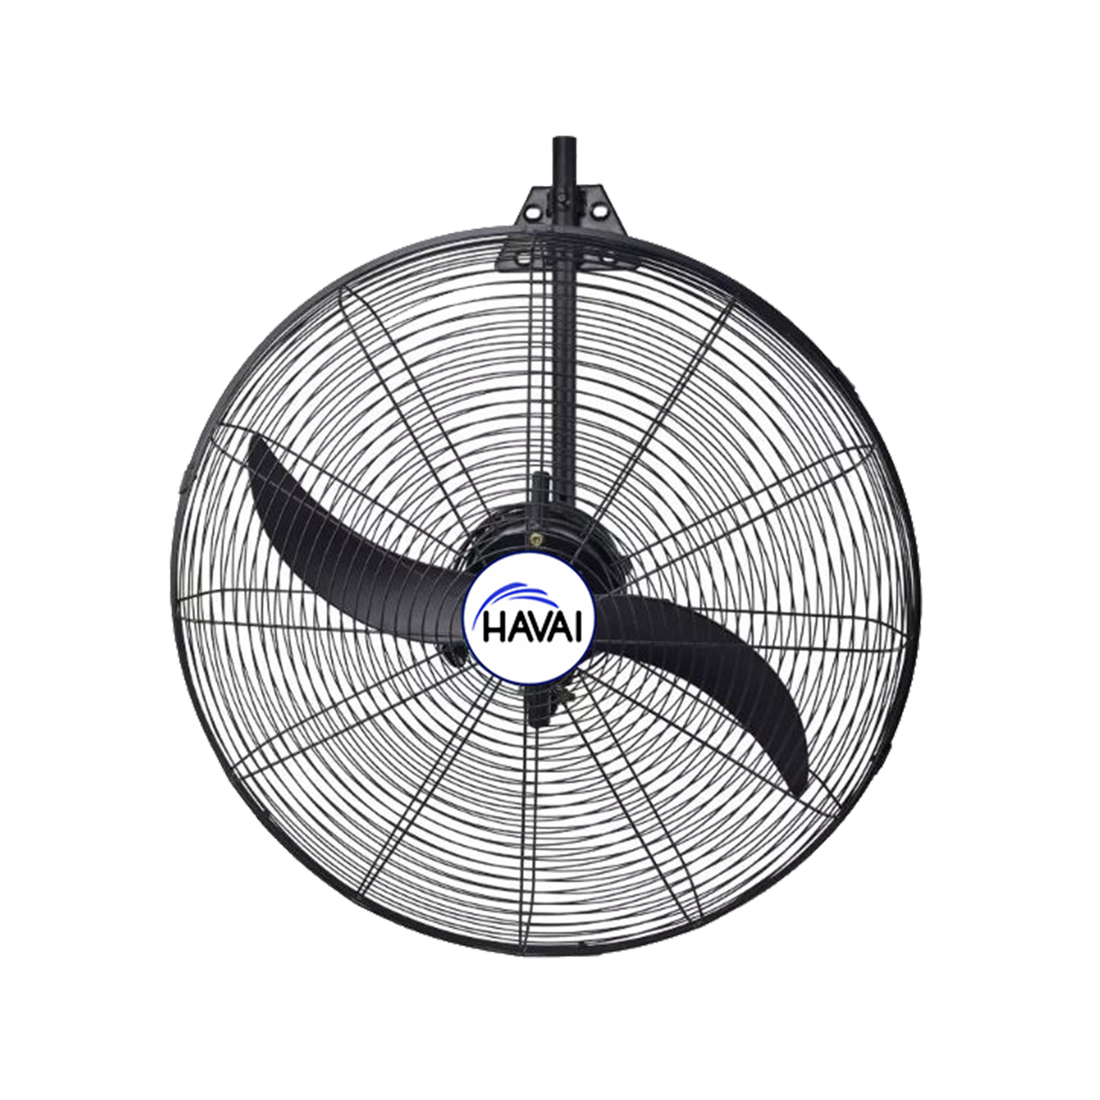 Havai BLDC Wall Mount Fan 20 Inch, 50% Savings On Electricity, High Velocity, Heavy Duty Metal For Industrial, Commercial And Residential Use, Assembly Included , Black